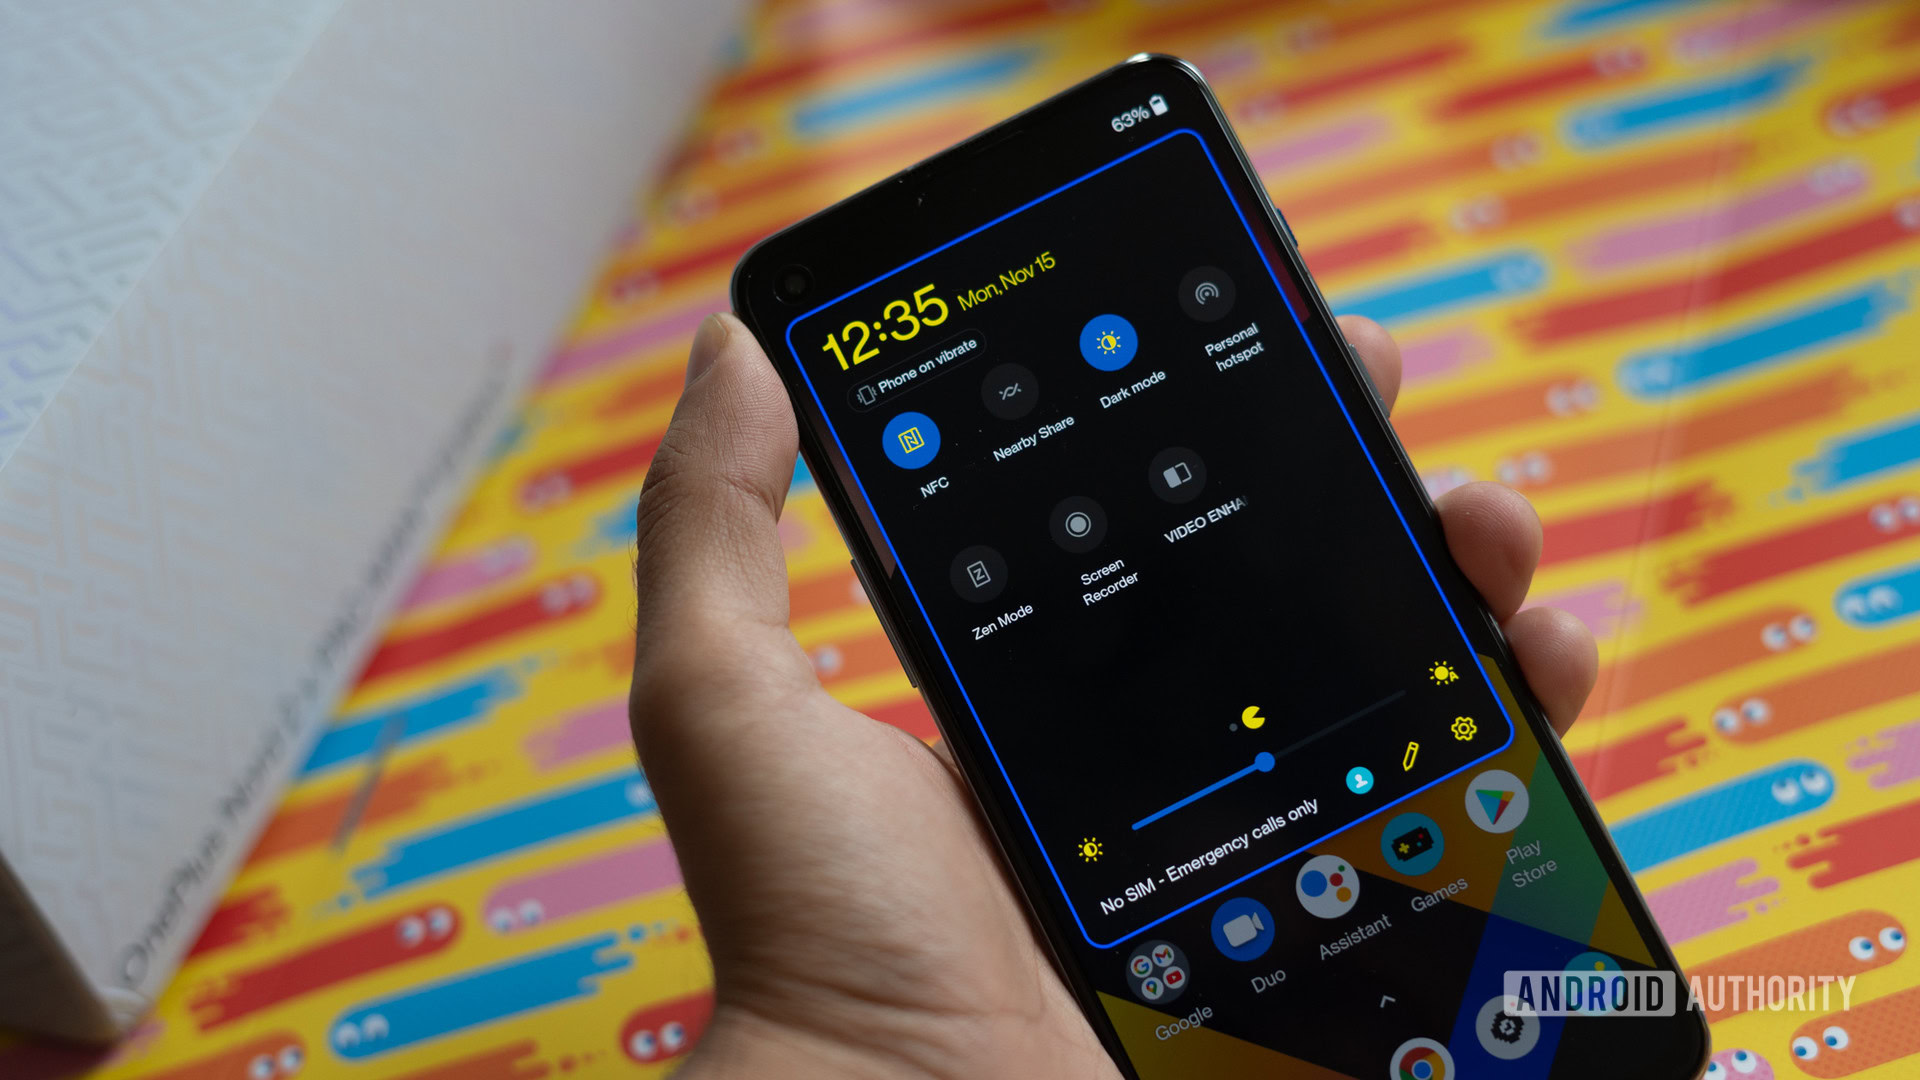 OnePlus 2 Pac-Man edition hands-on: A fun retro gaming throwback phone